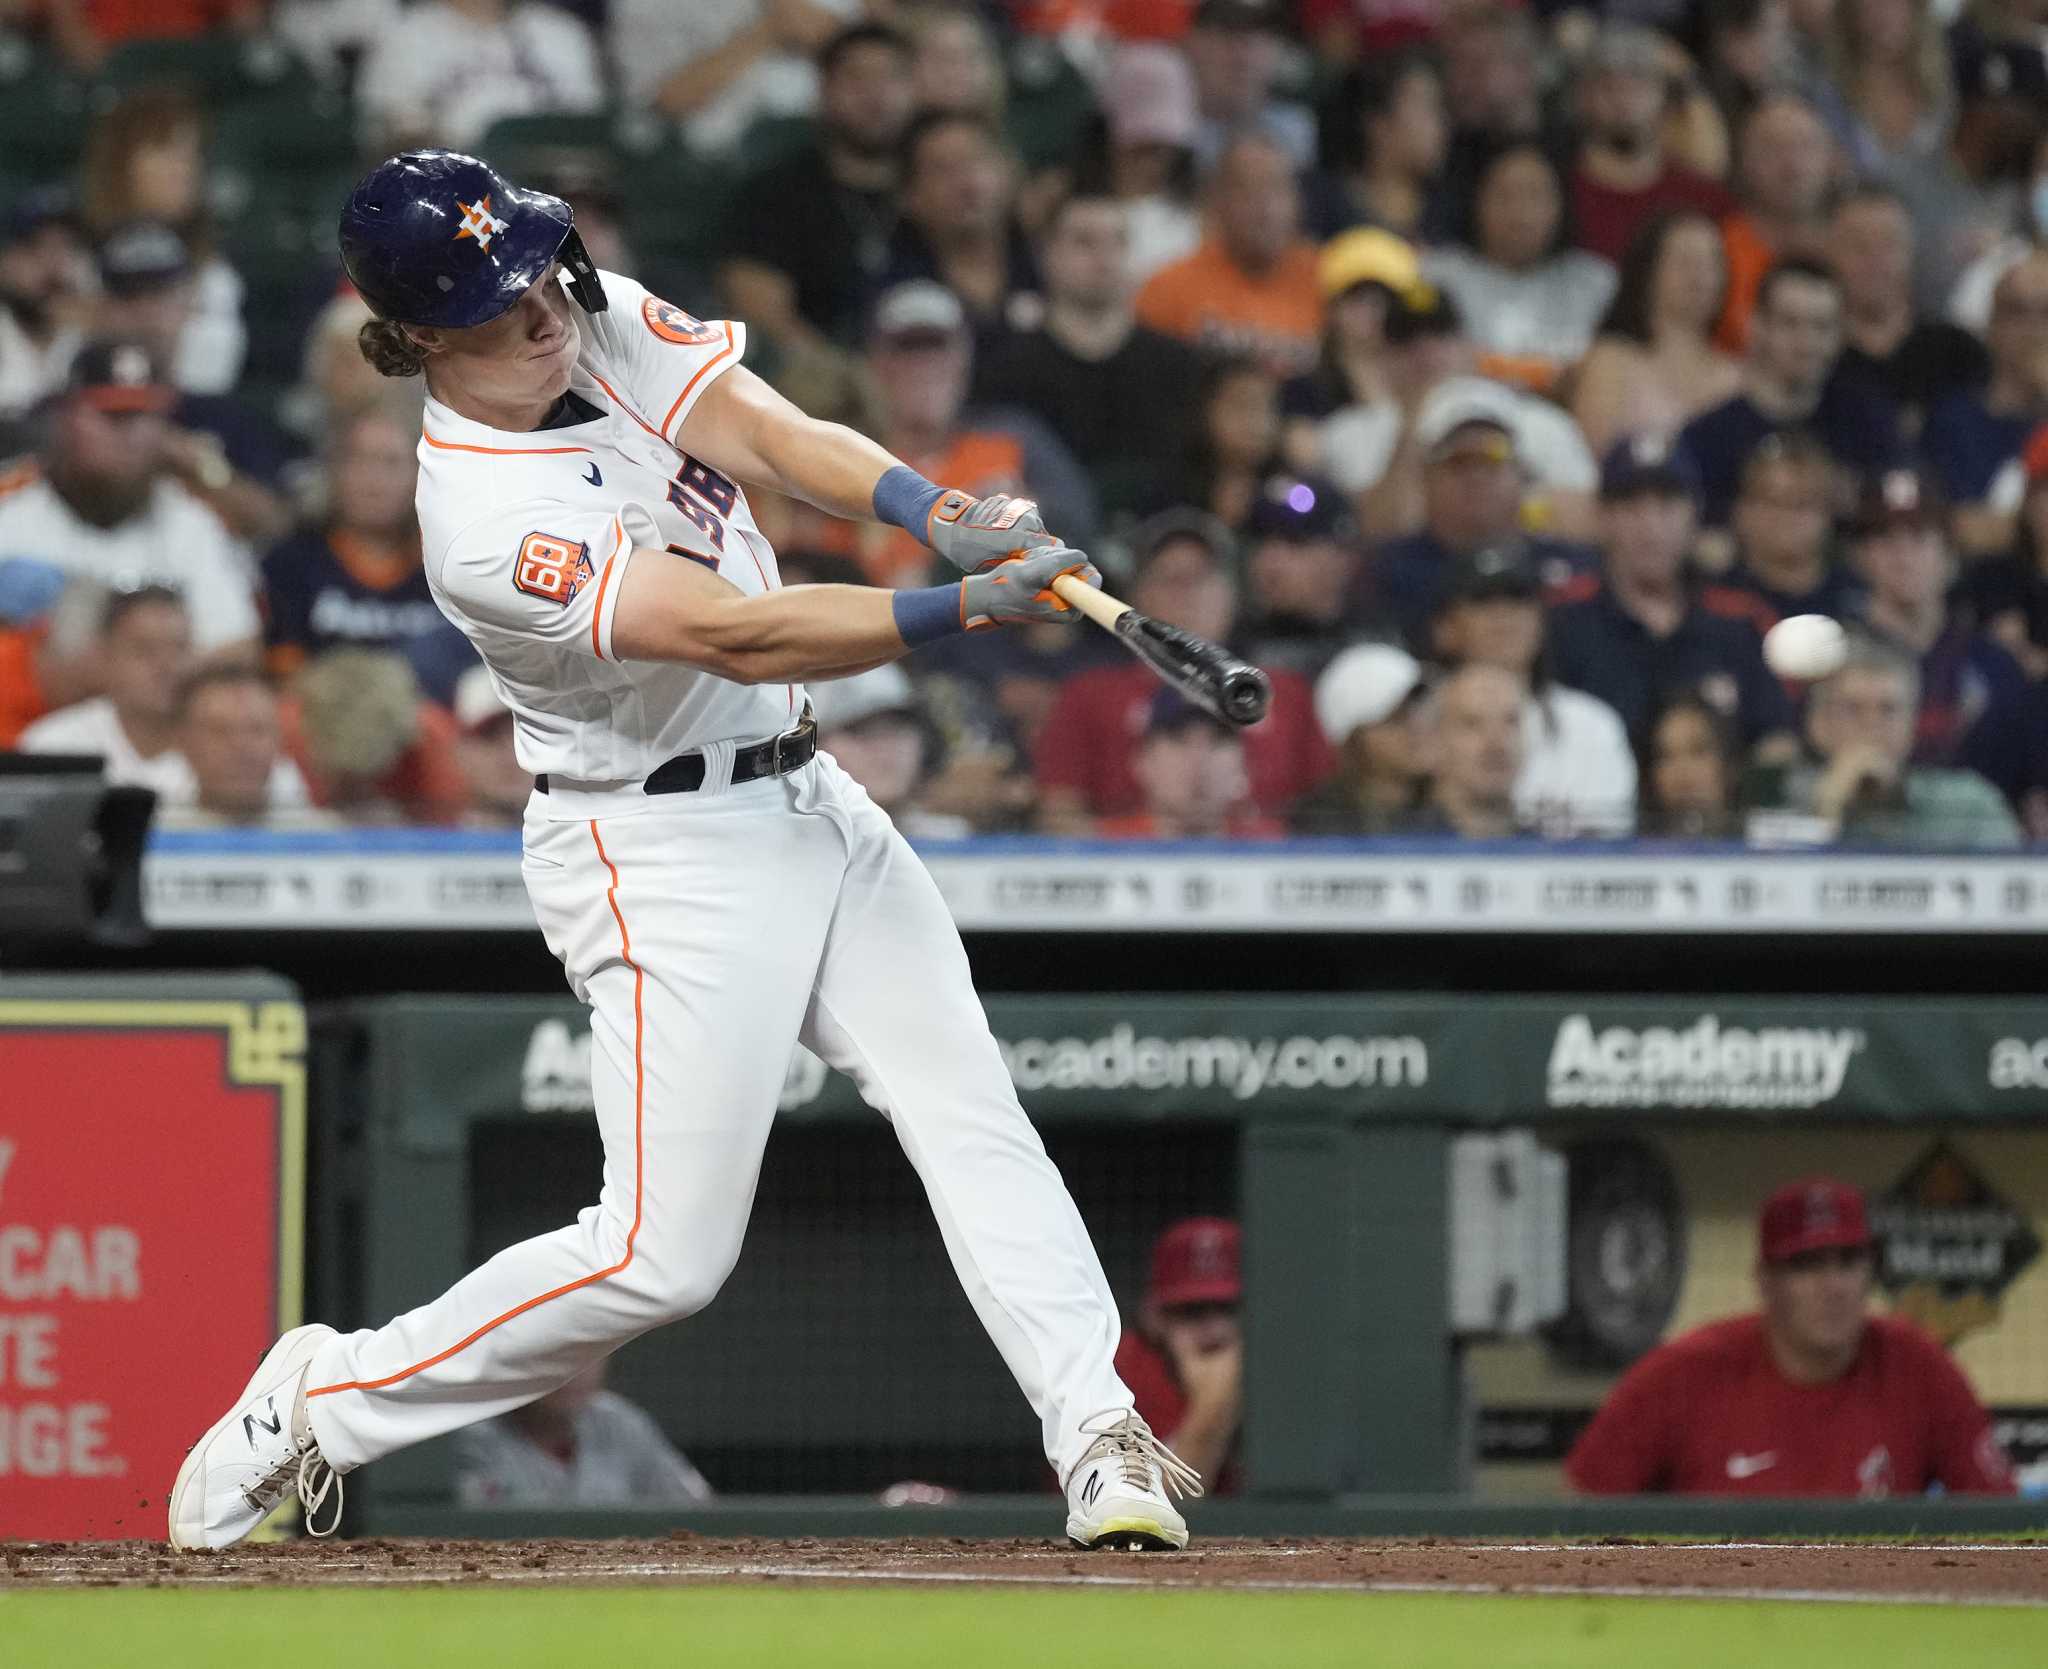 Astros center fielder Jake Meyers playing with renewed confidence